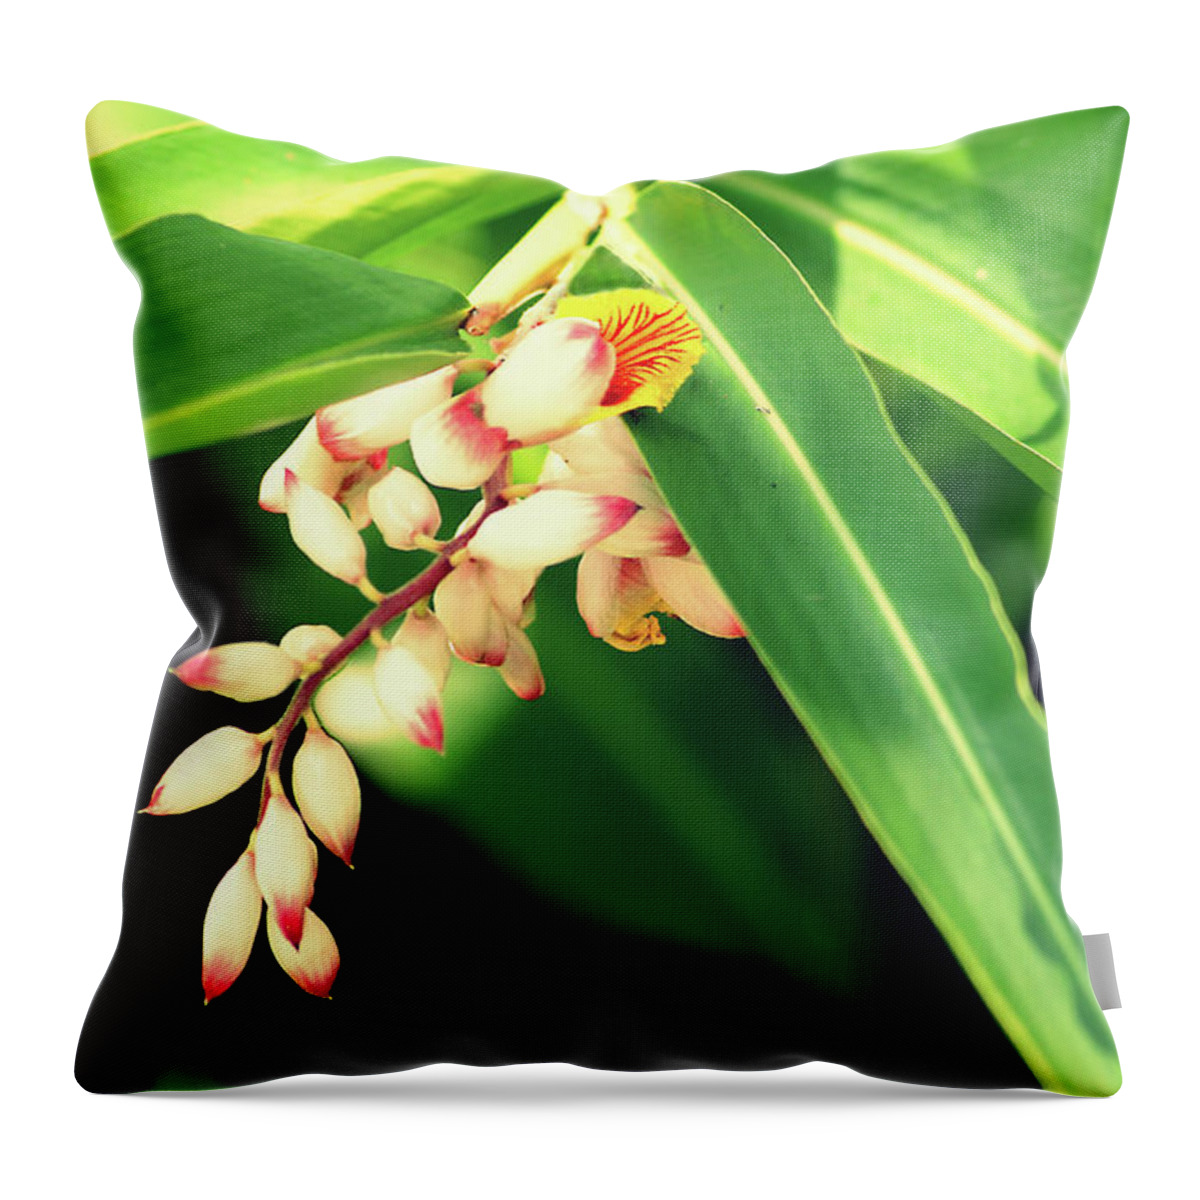 Shell Ginger Throw Pillow featuring the photograph Shell Ginger by Hilda Wagner